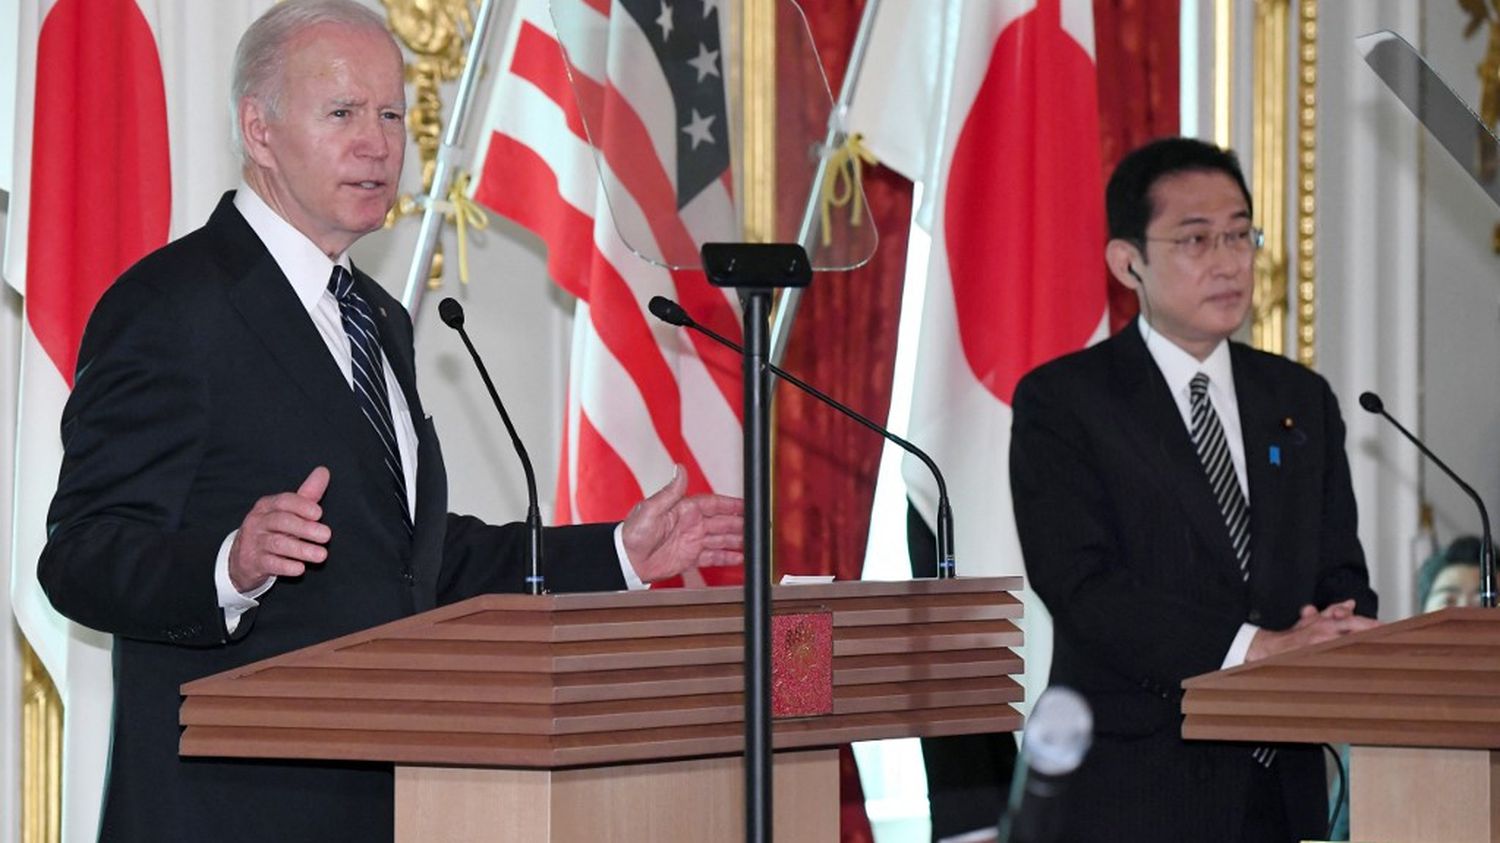 Joe Biden assures that the United States will defend Taiwan in the event of a Chinese invasion
